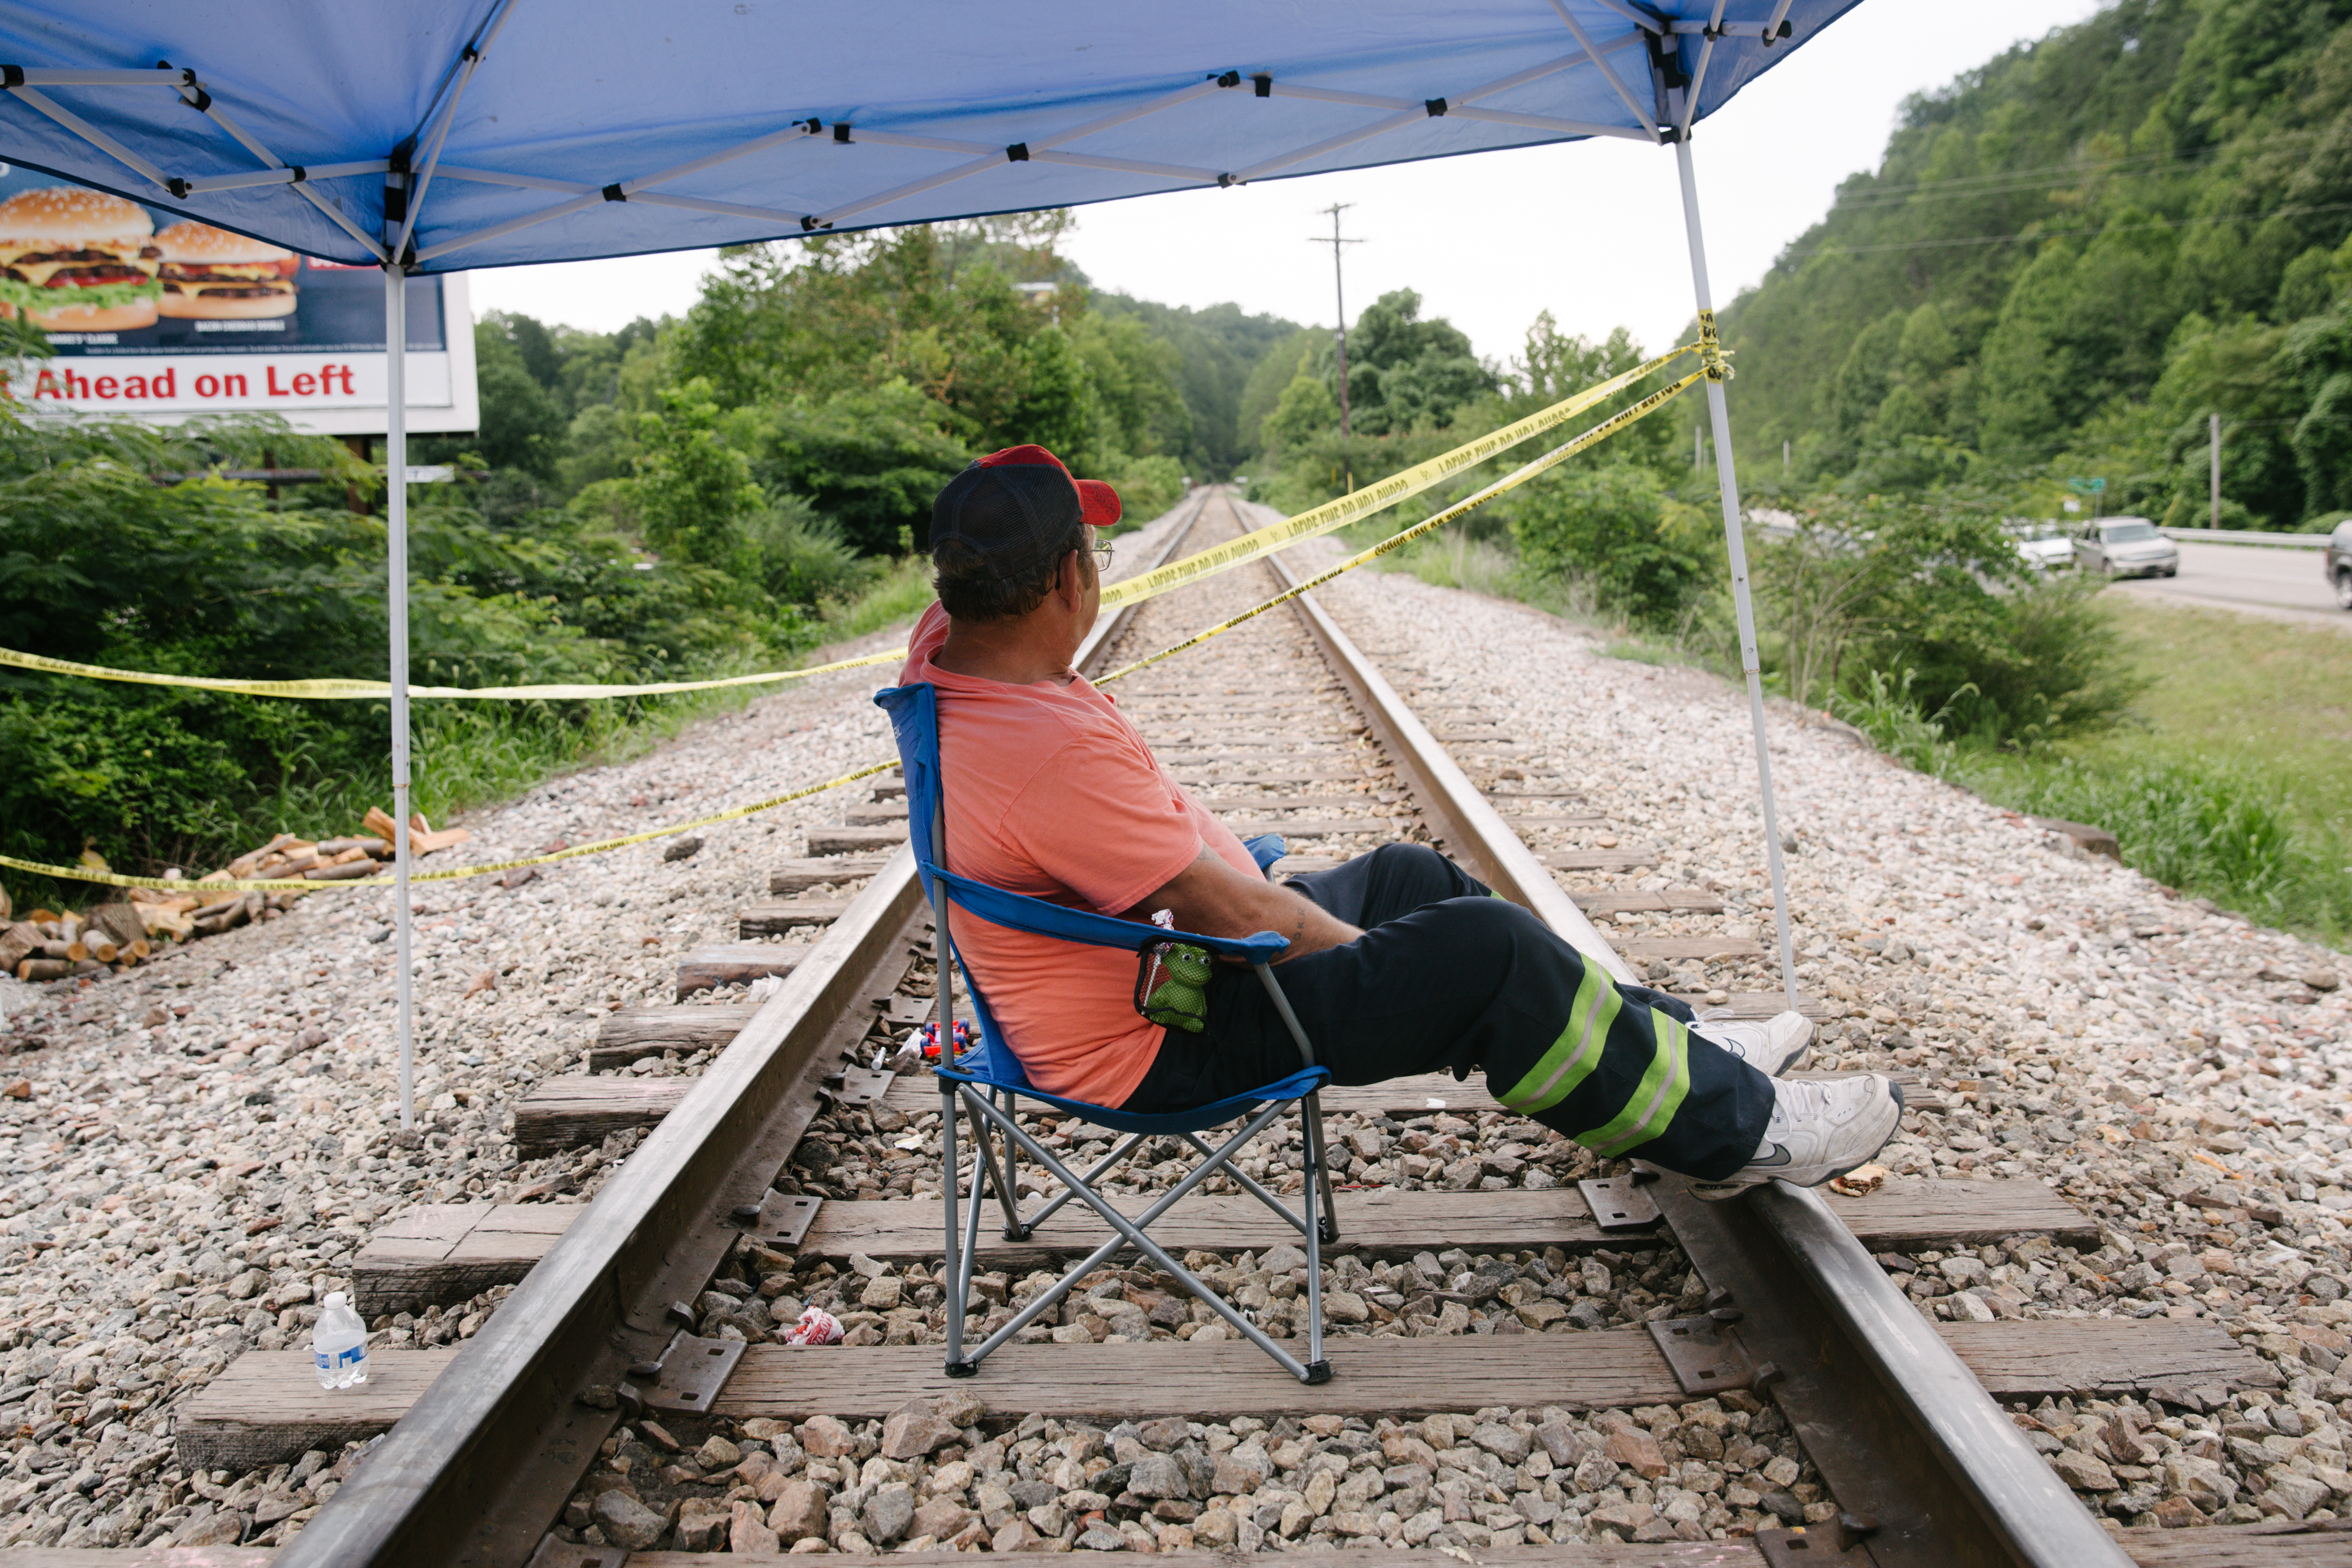 A miner sits on train tracks in Cumberland, Kentucky, U.S., on Friday, Aug. 2, 2019. The miners have been working in shifts to block railroad tracks leading to a Blackjewel mine outside since Monday afternoon, Harlan County Judge-Executive Dan Mosley said in an interview. (Meg Roussos/Bloomberg via Getty Images)